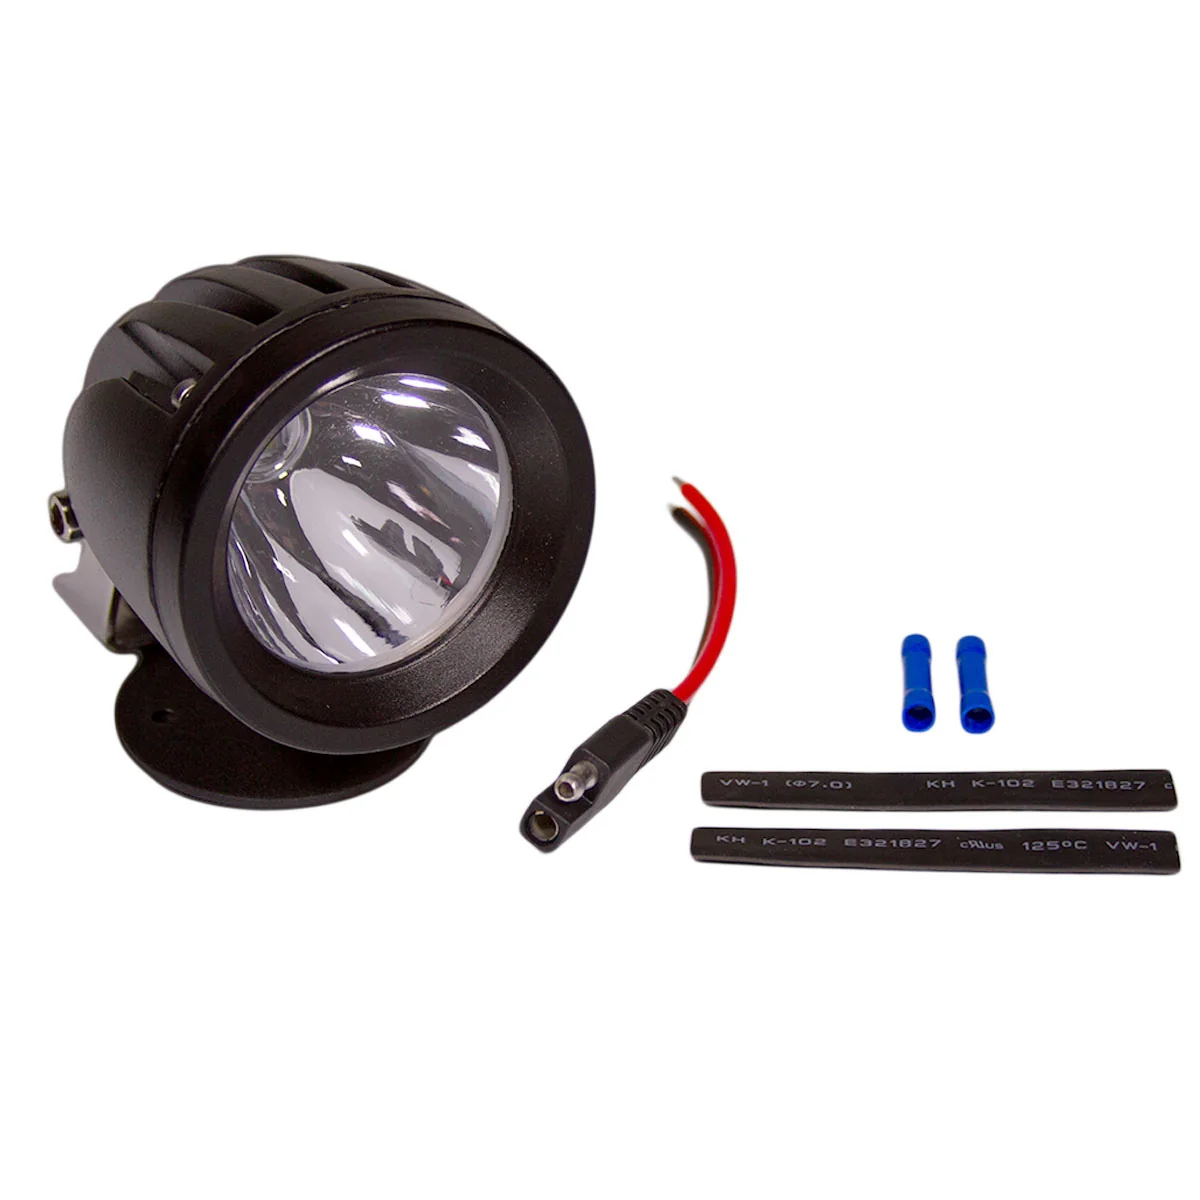 Do you plan on restocking the 3" LED Spot Light With YP-SAE4 Power Plug?